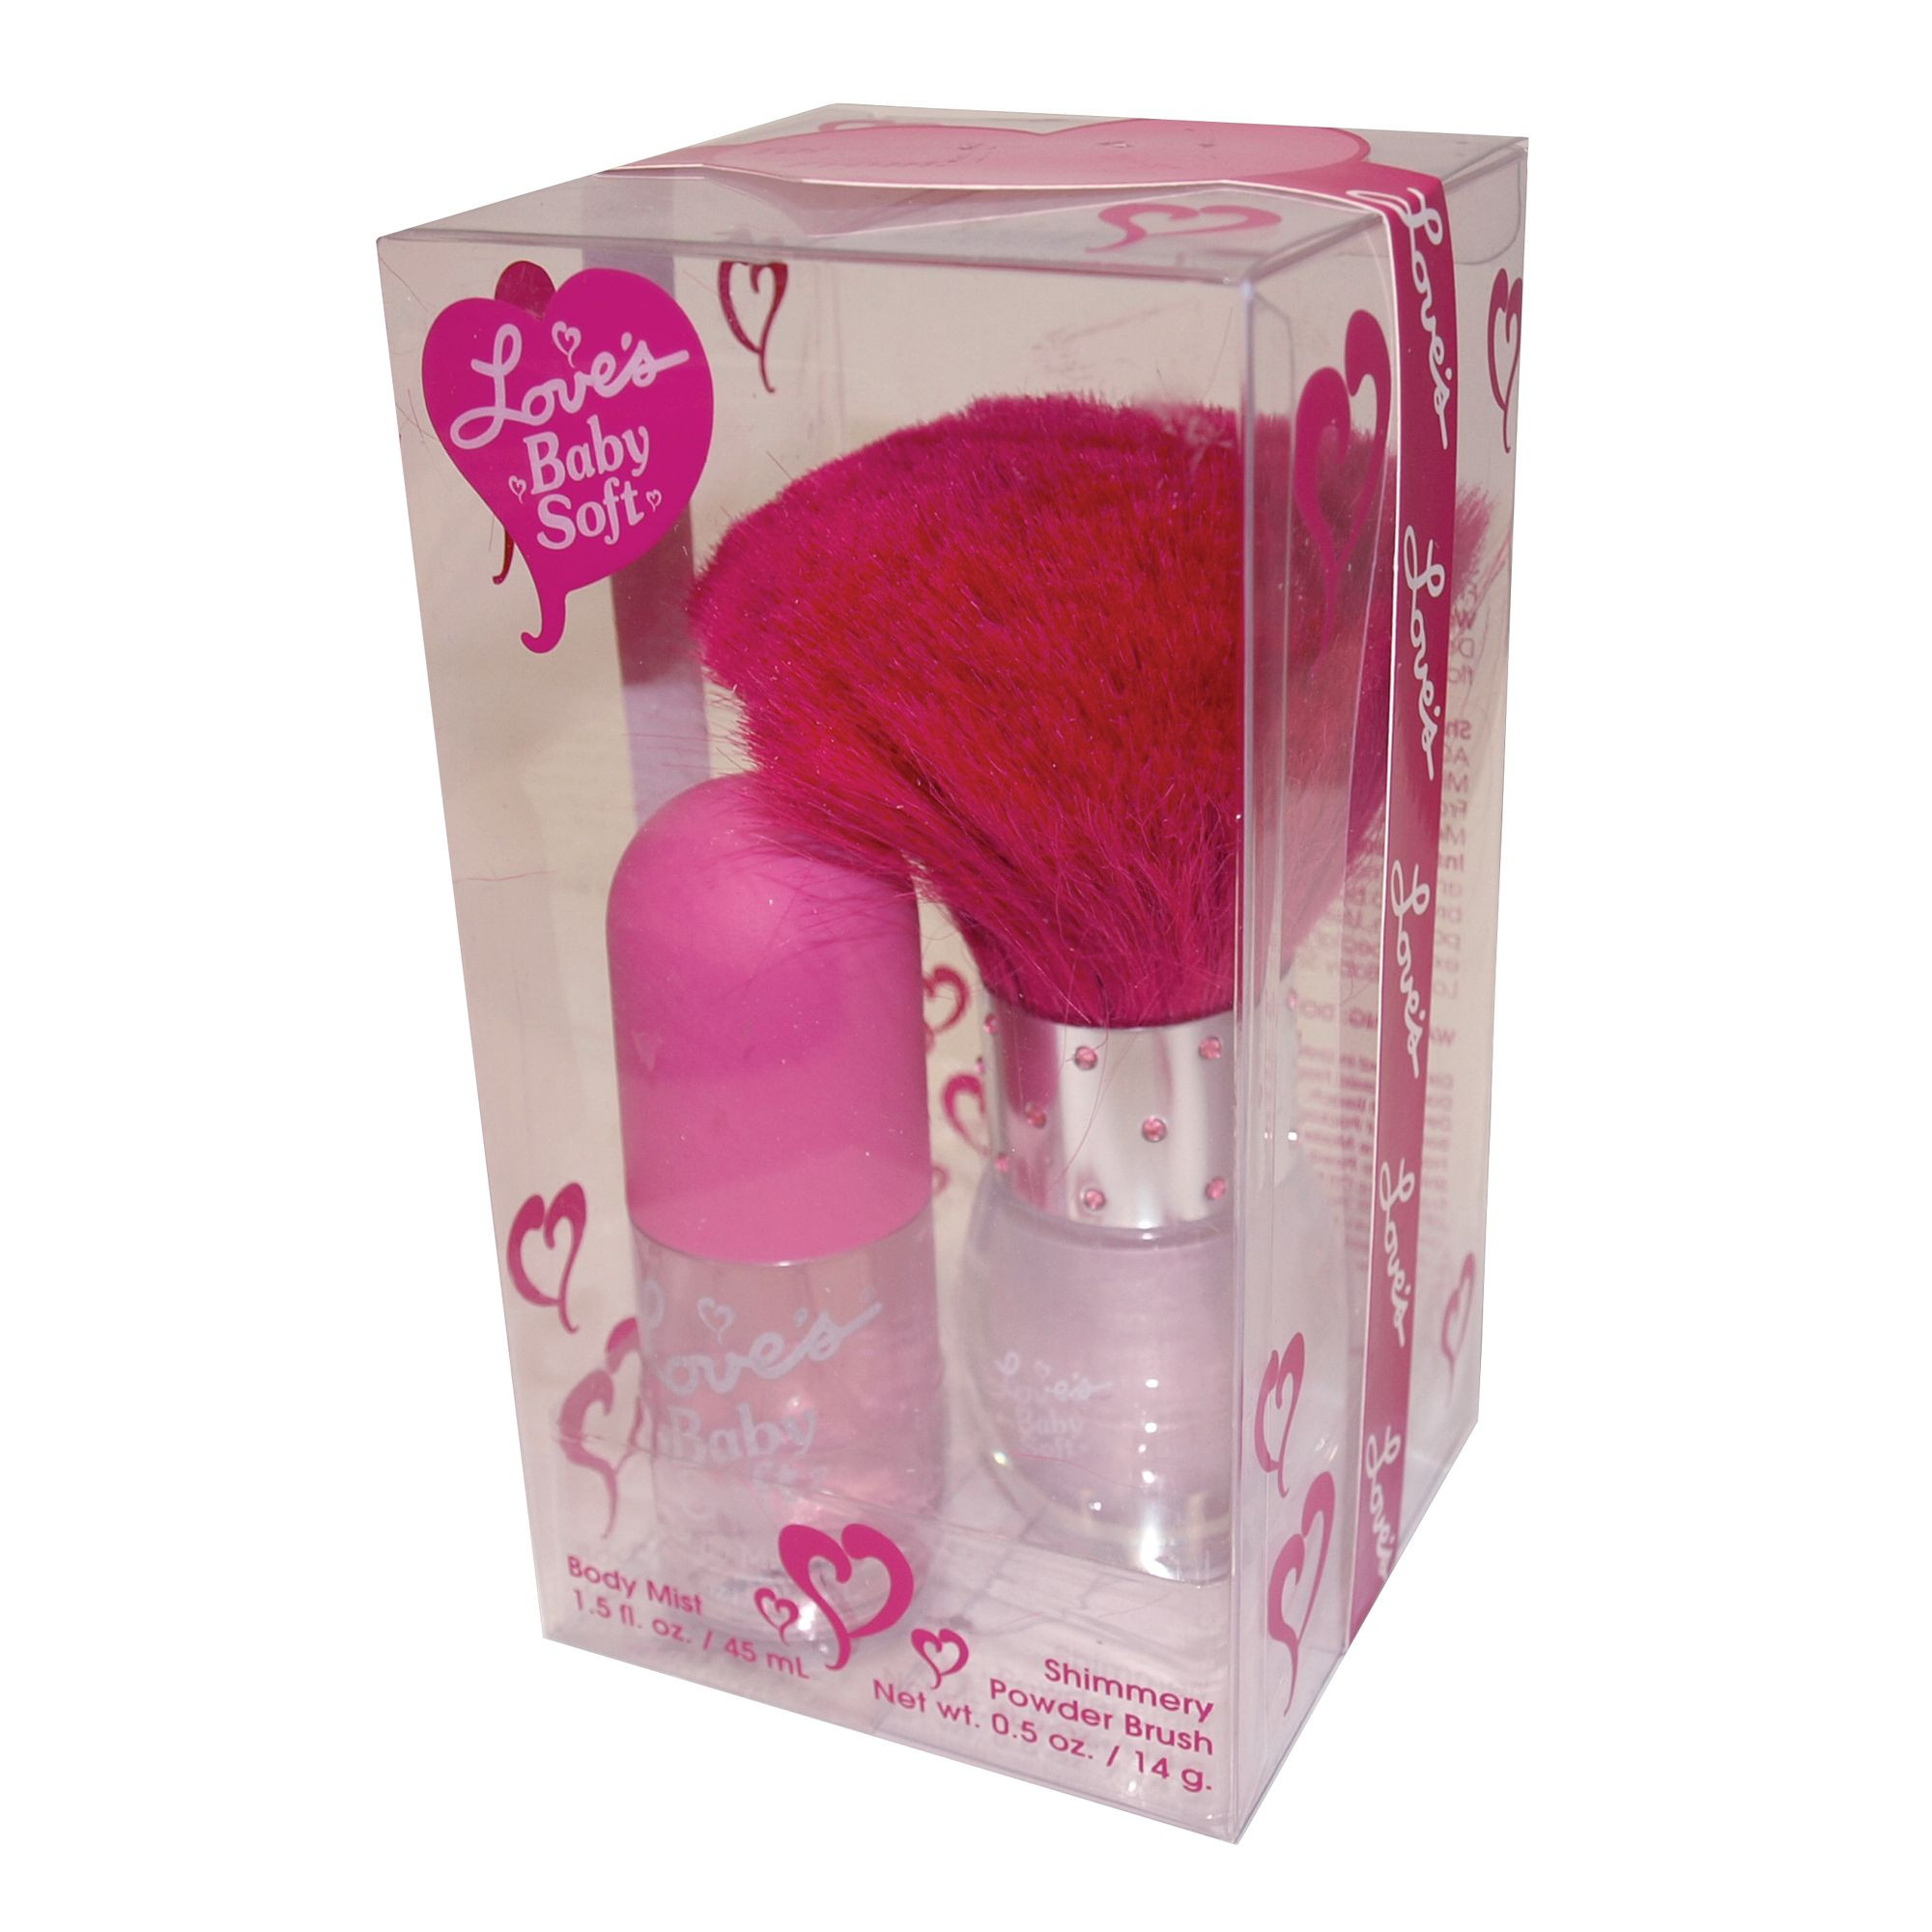 Loves Baby Soft Perfume Gift Sets
 Love s Baby Soft Gift Set